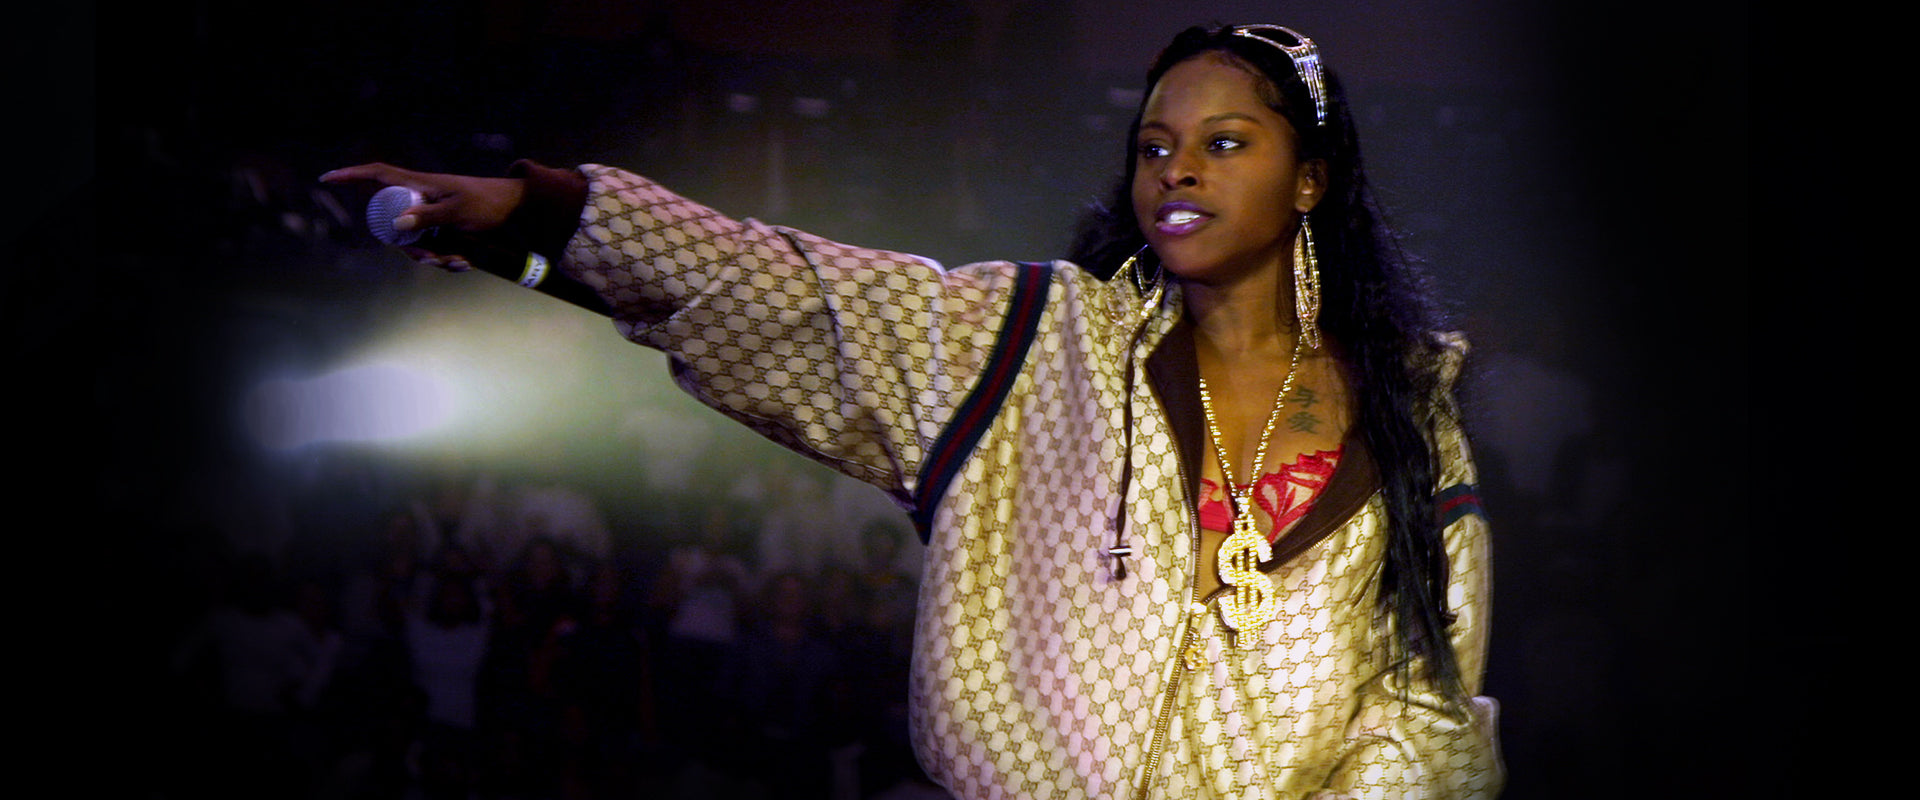 Ill Na Na 4 Things You Didn't Know About Foxy Brown Rock The Bells